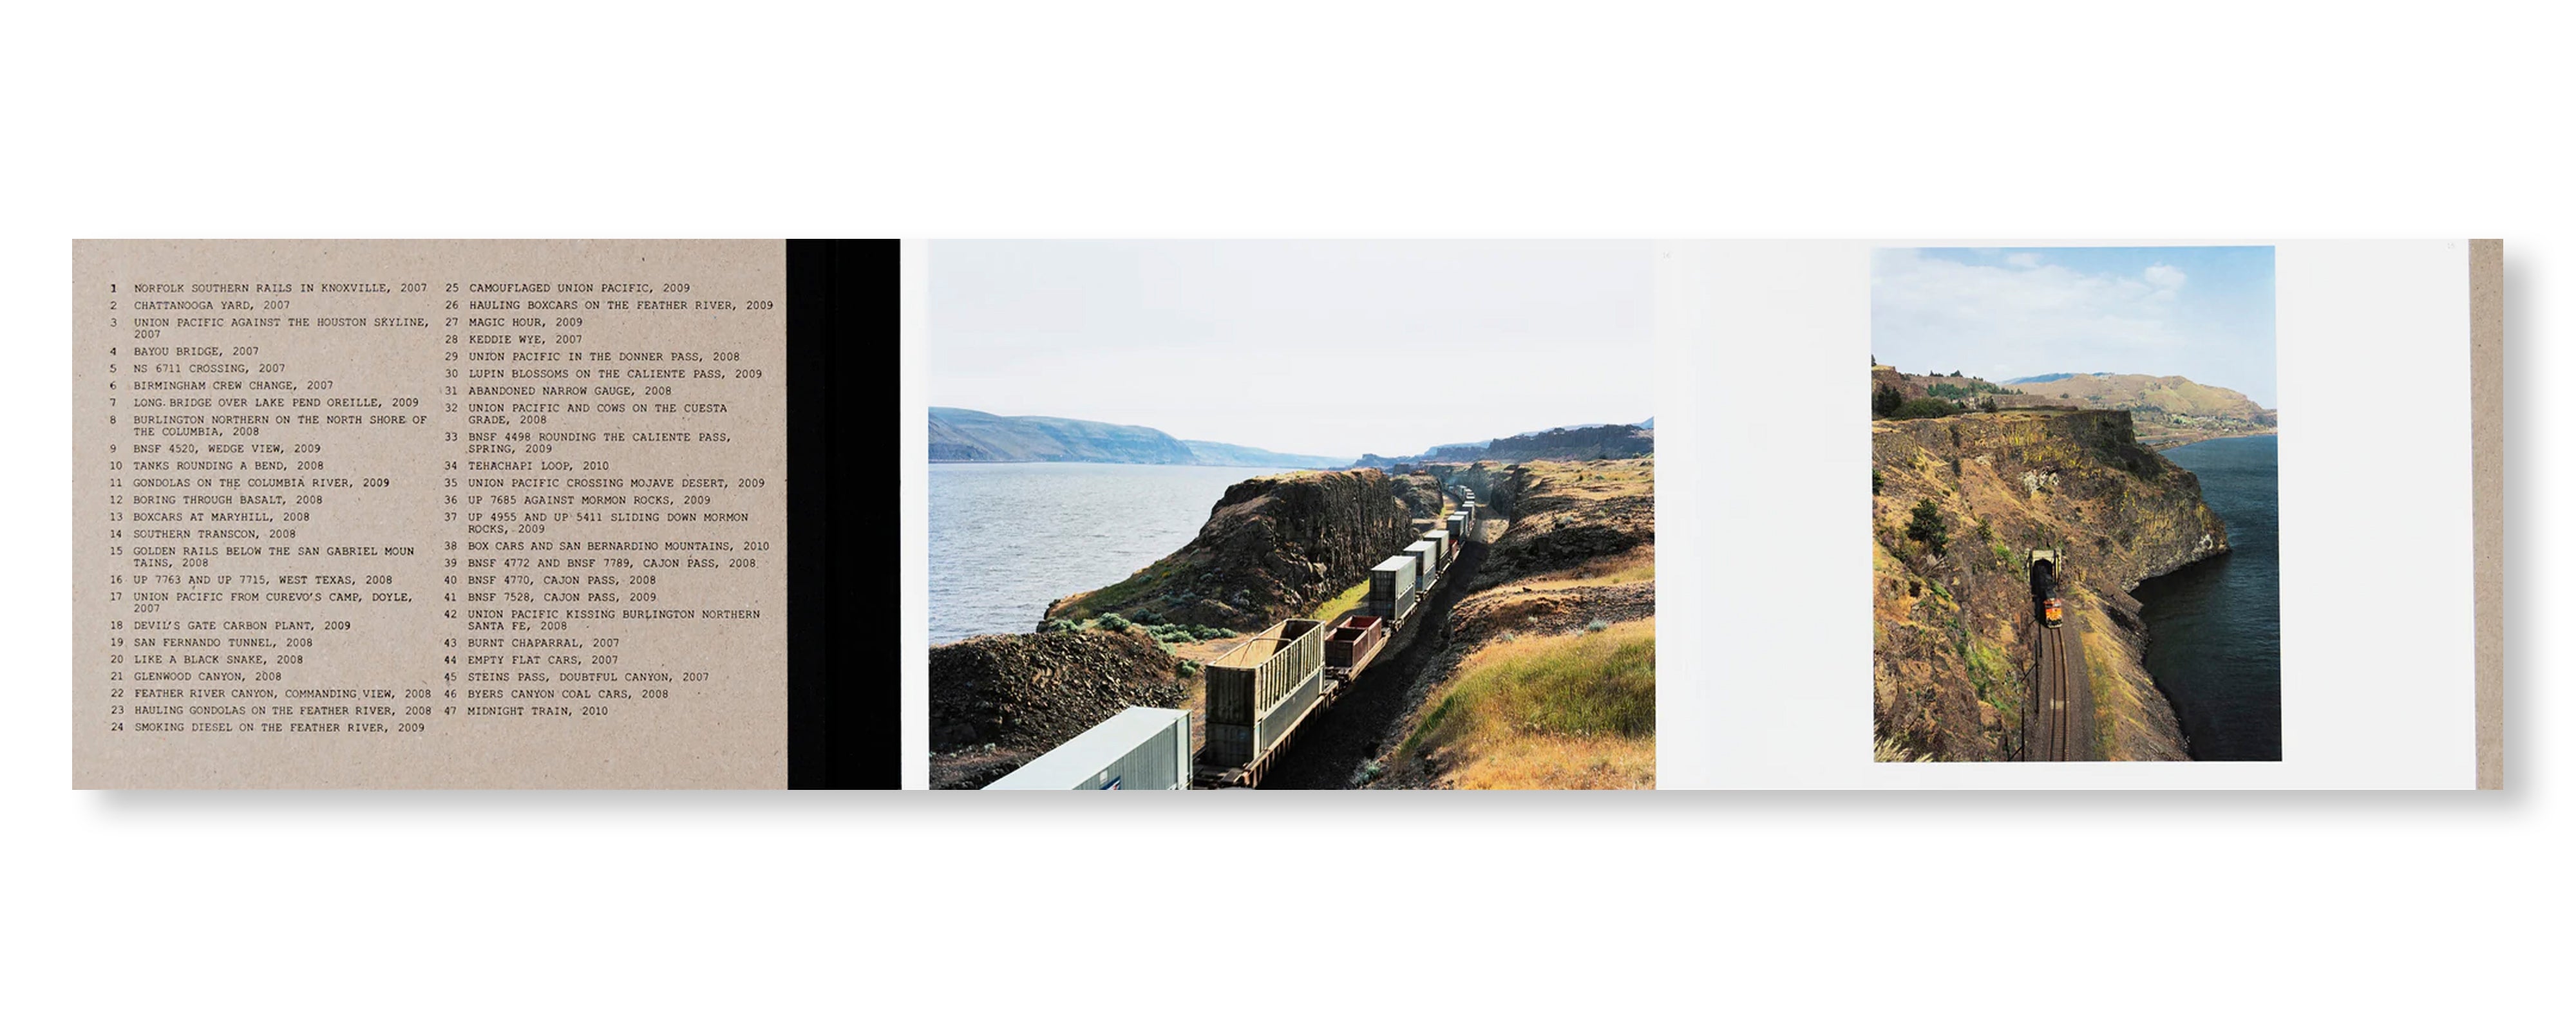 THIS TRAIN by Justine Kurland [SIGNED]